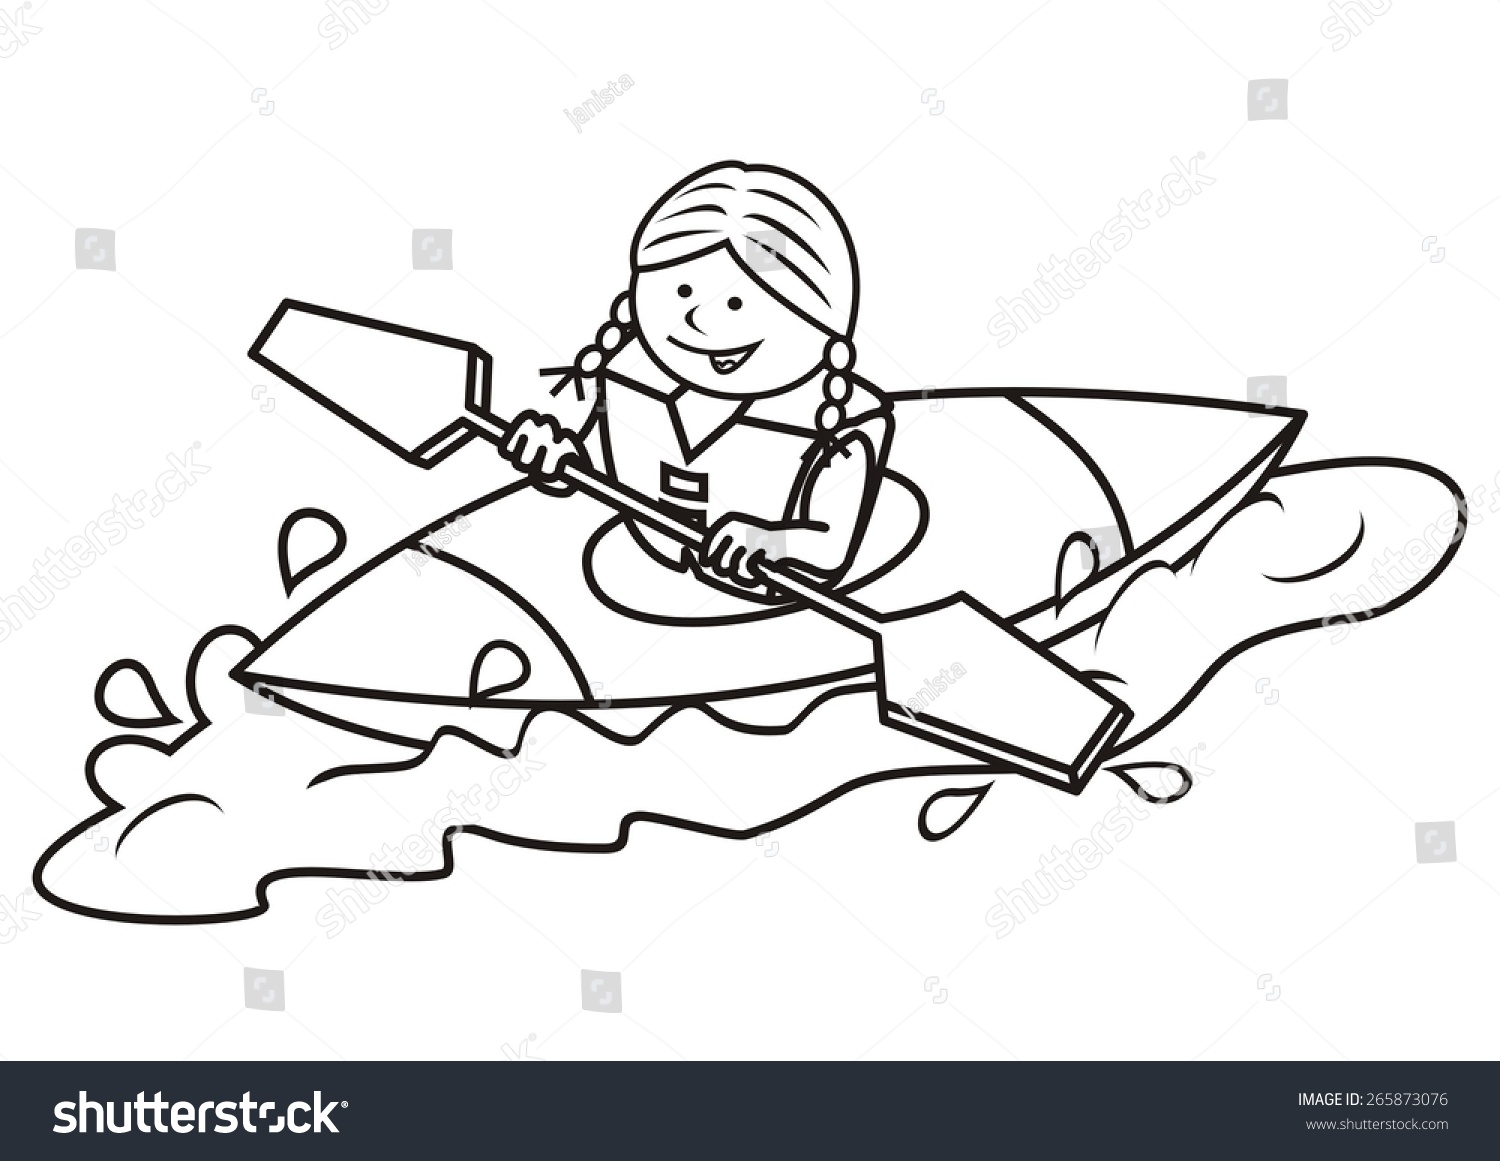 Kayak girl coloring page vector icon stock vector royalty free